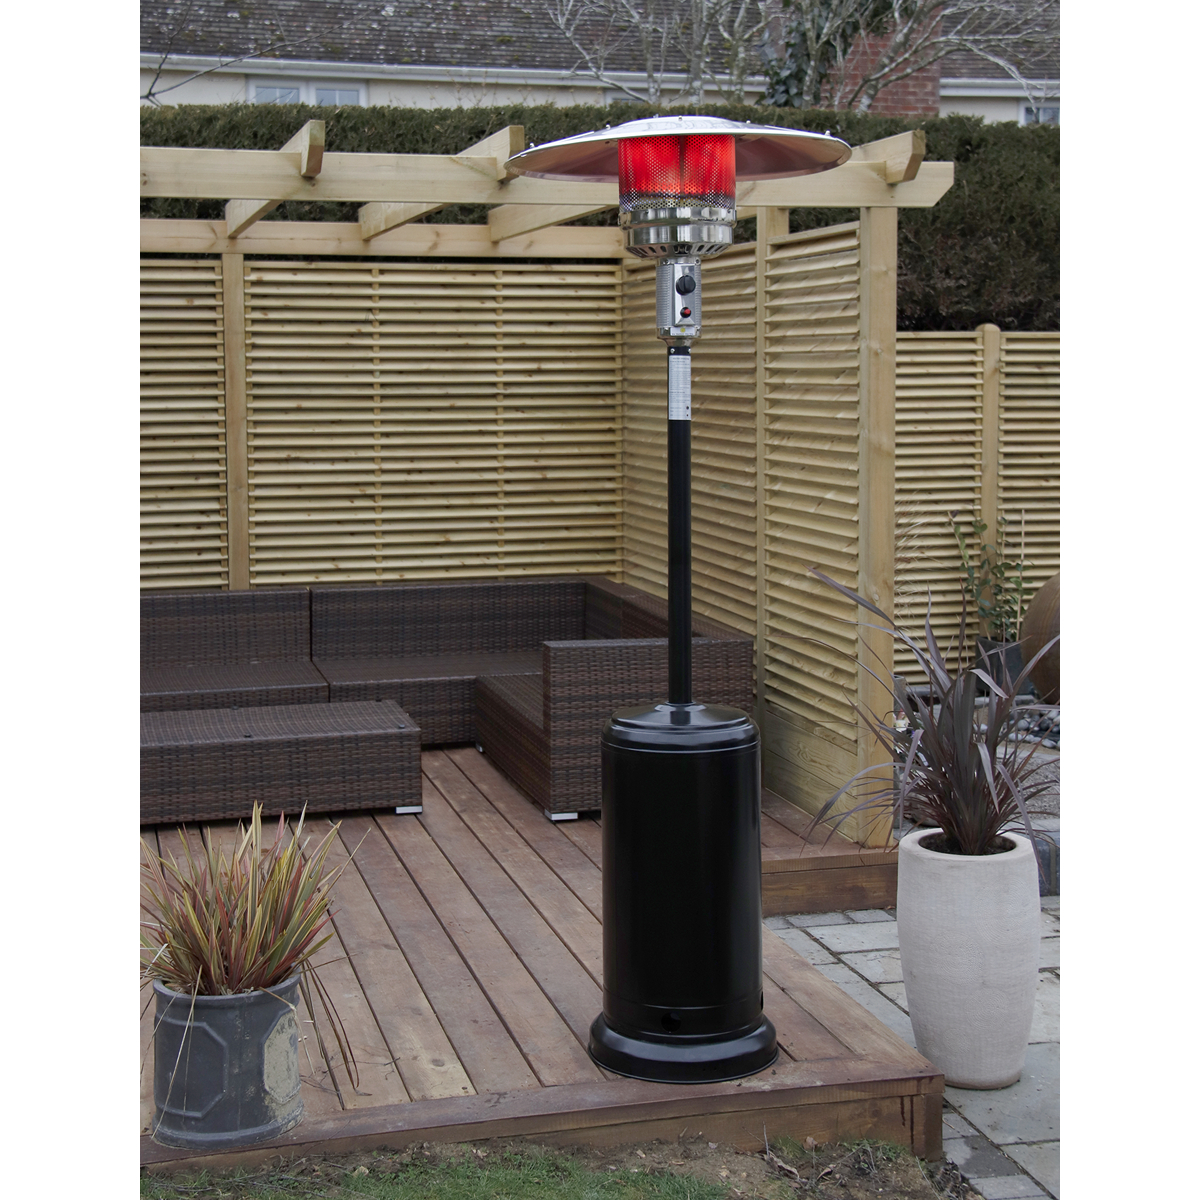 Dg1 Propane Gas Tower Patio Heater 13kw with regard to dimensions 1200 X 1200